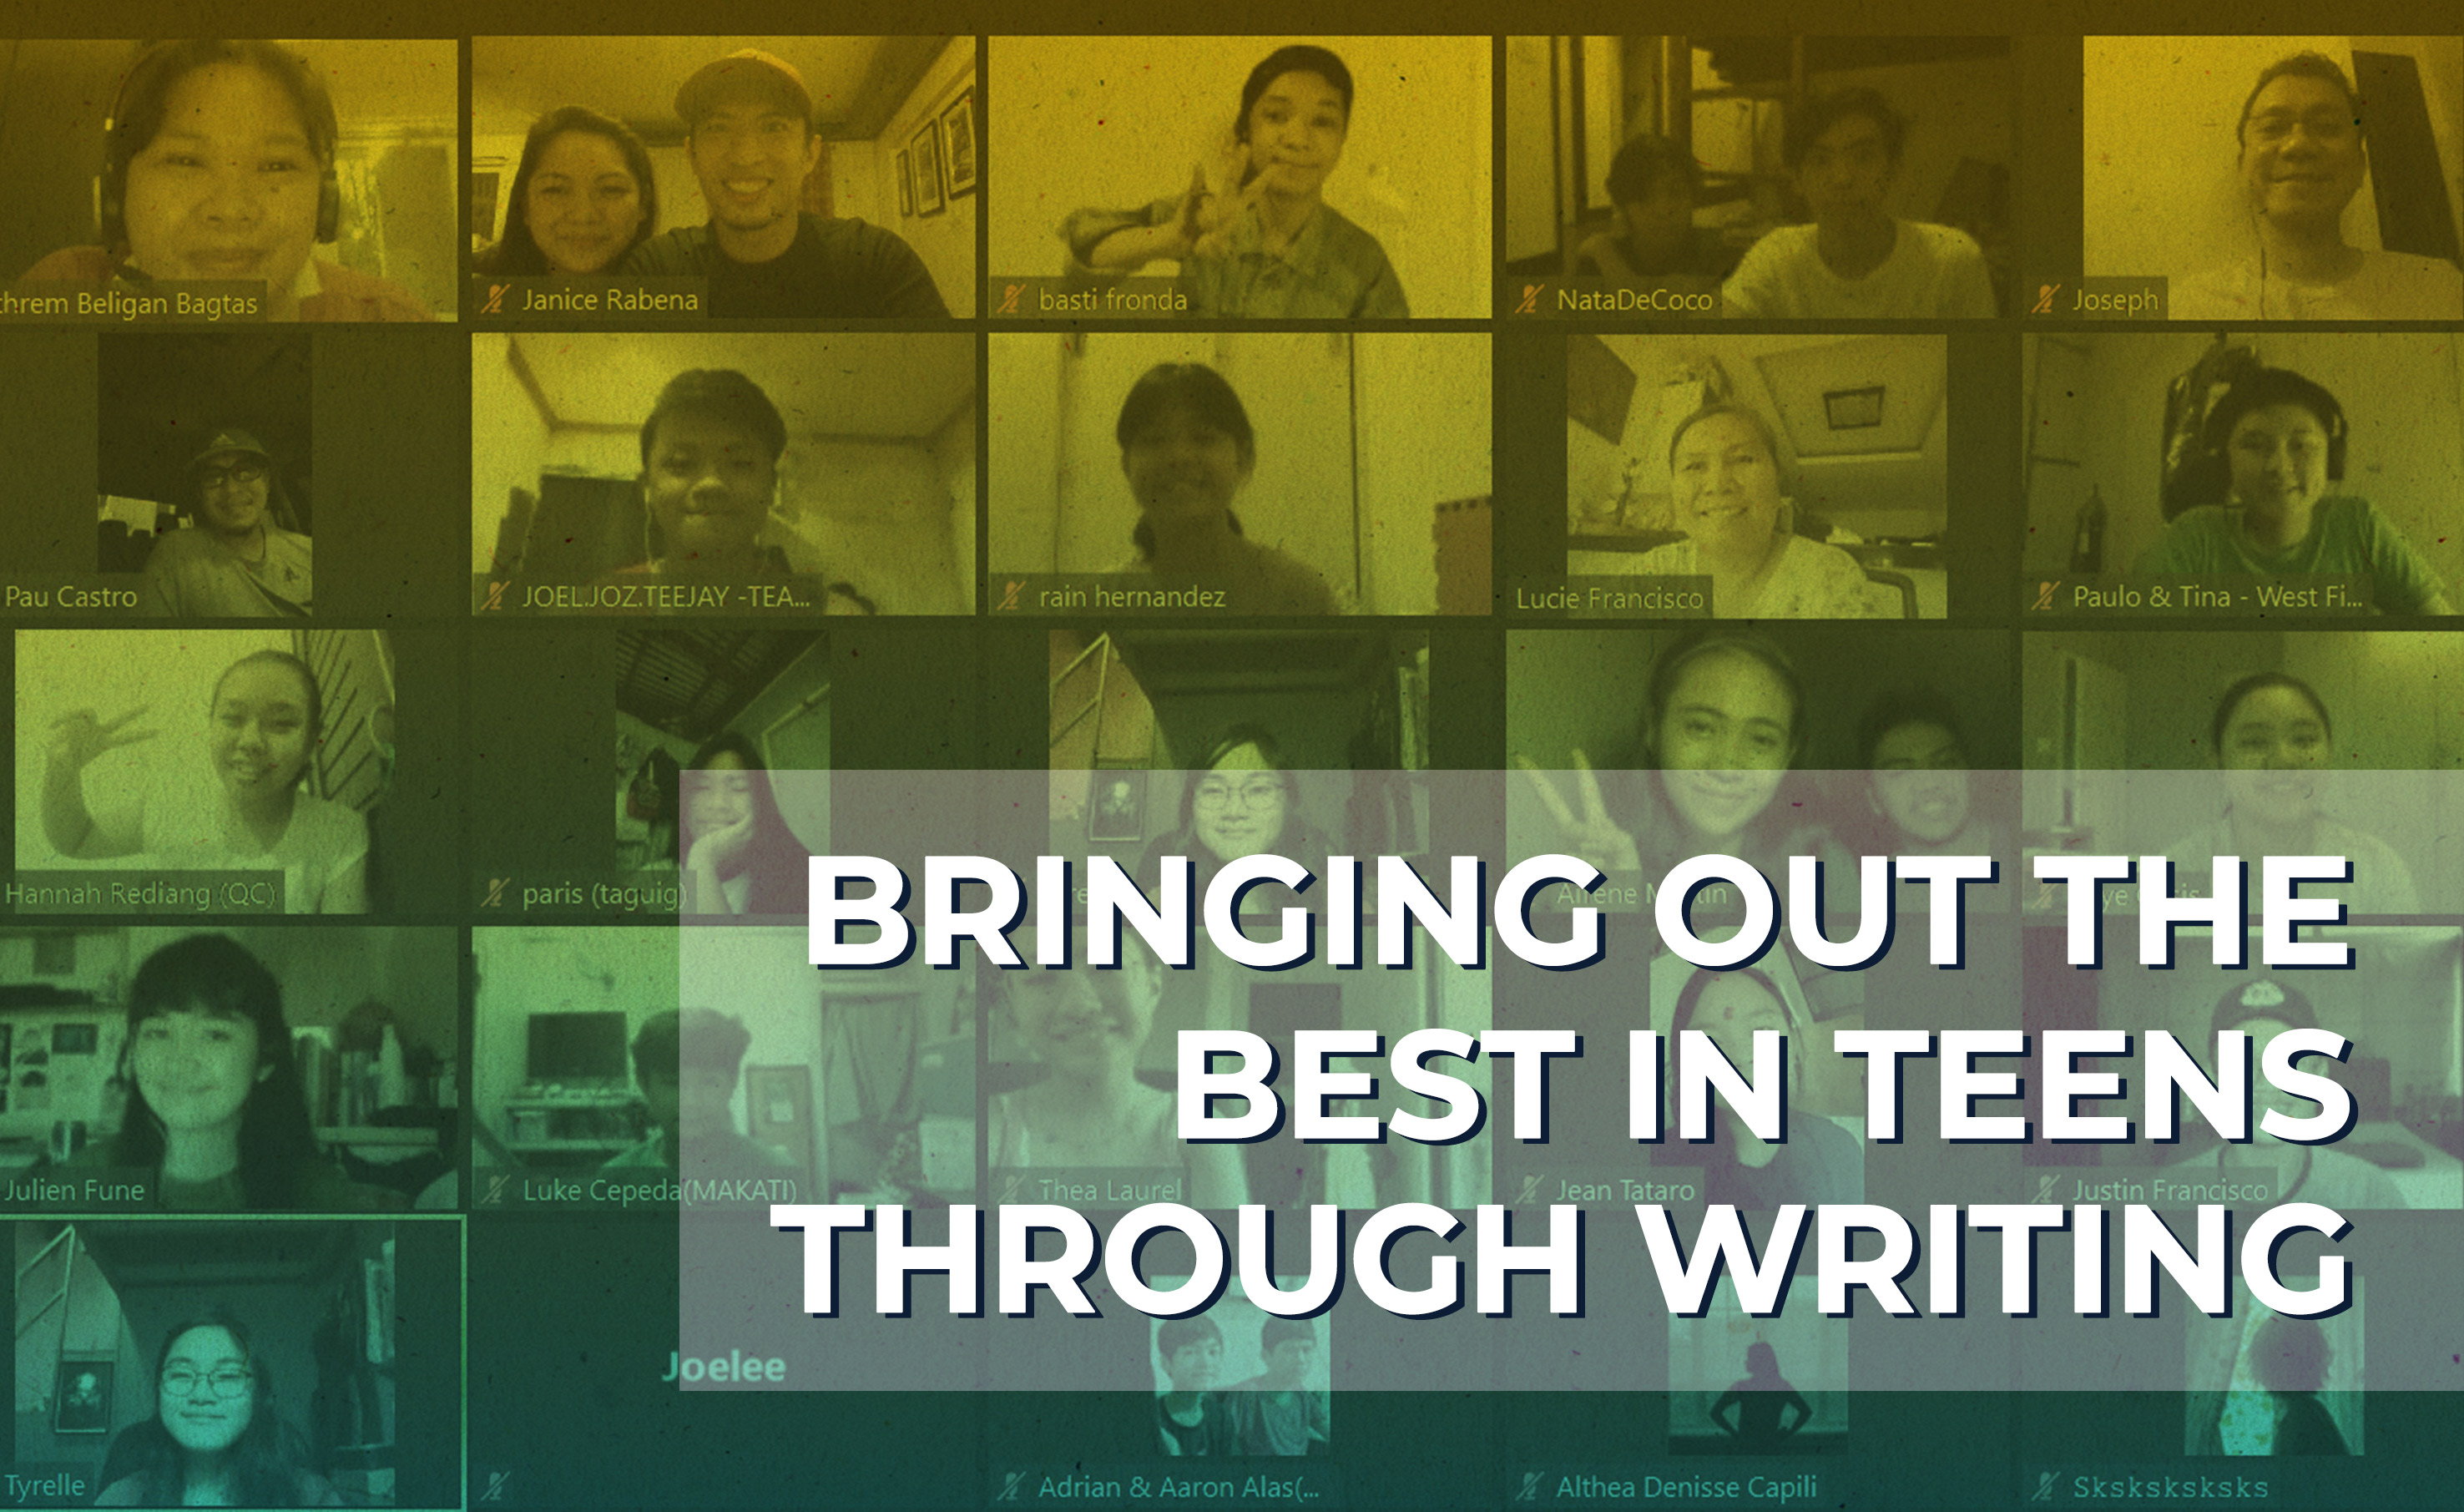 Bringing Out the Best in Teens Through Writing